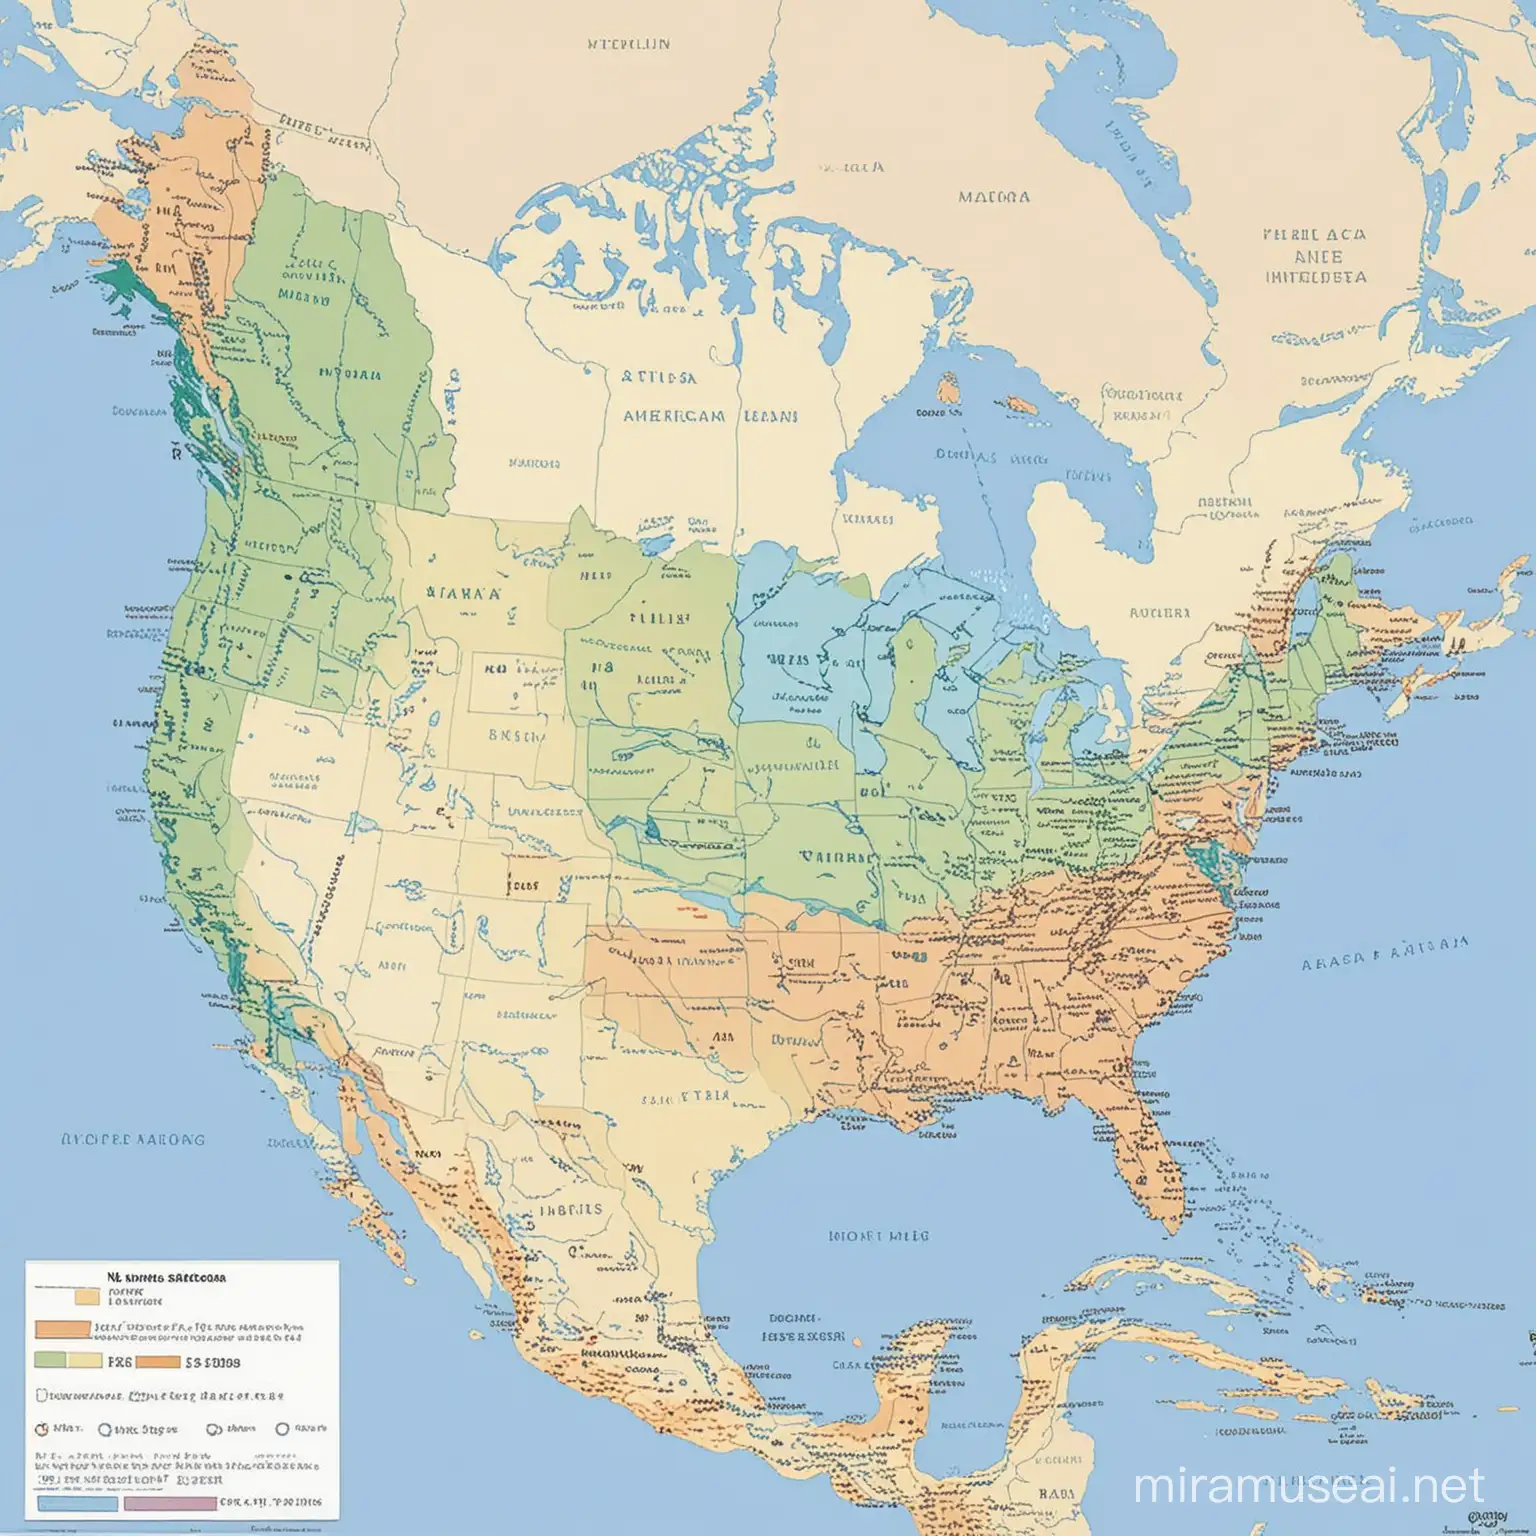 Create a map of Native American tribes before European contact from Alaska to Argentina